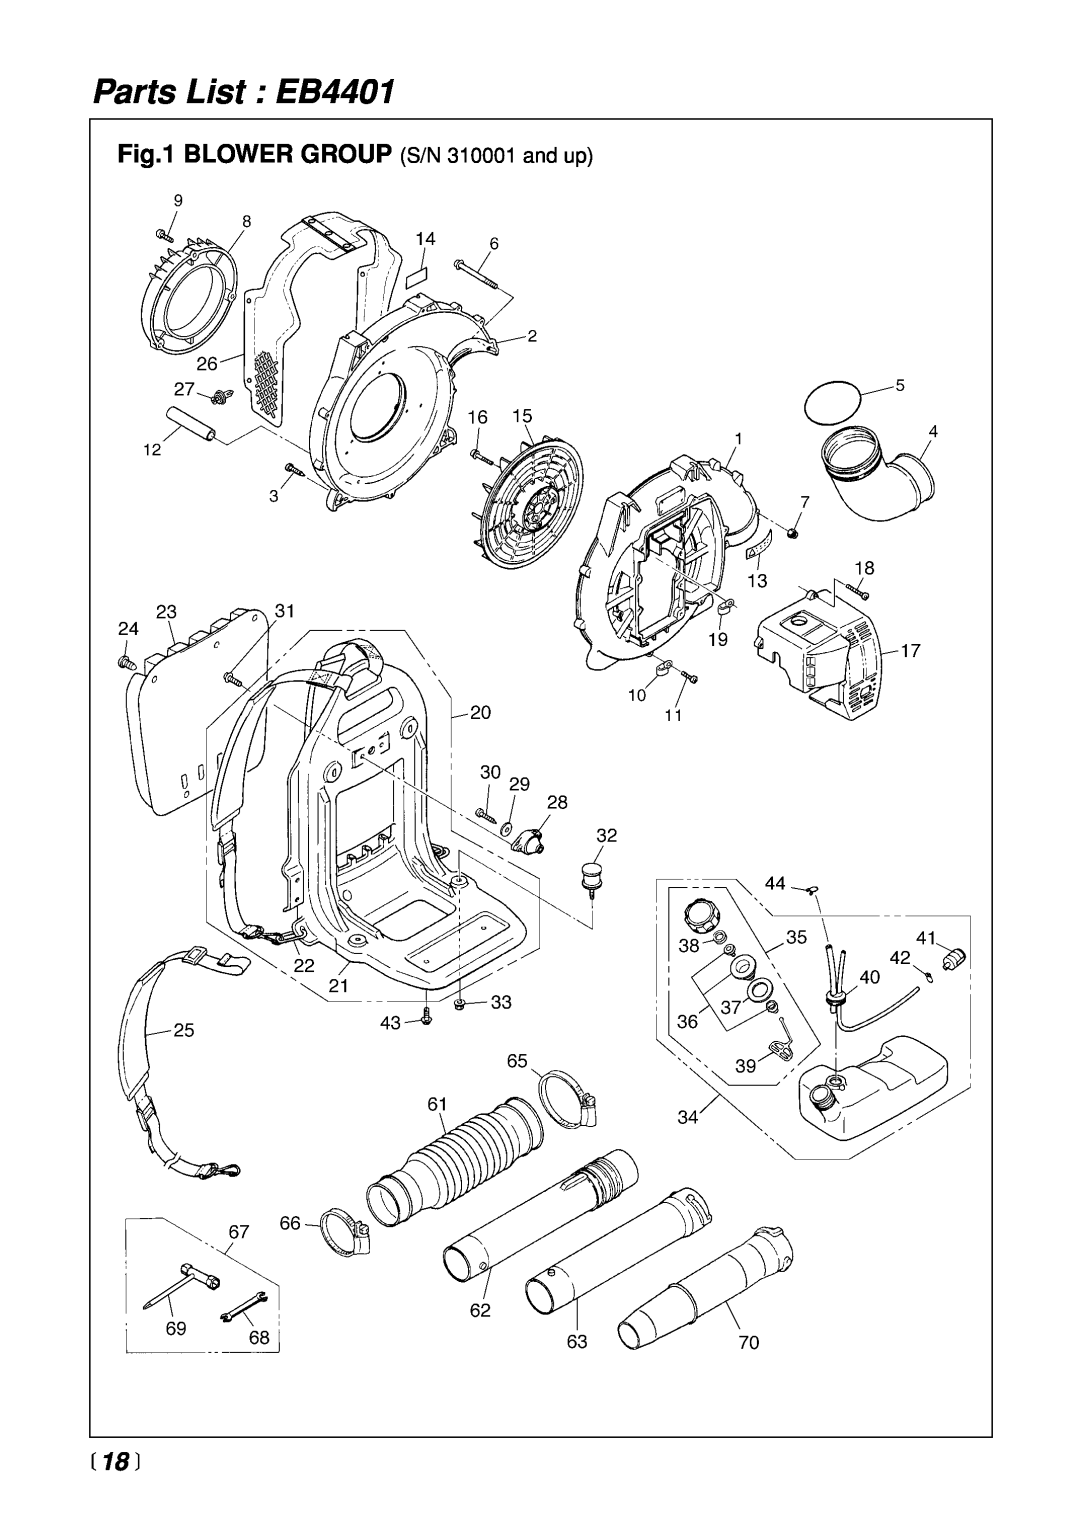 Zenoah manual Parts List EB4401, BLOWER GROUP S/N 310001 and up,  18  